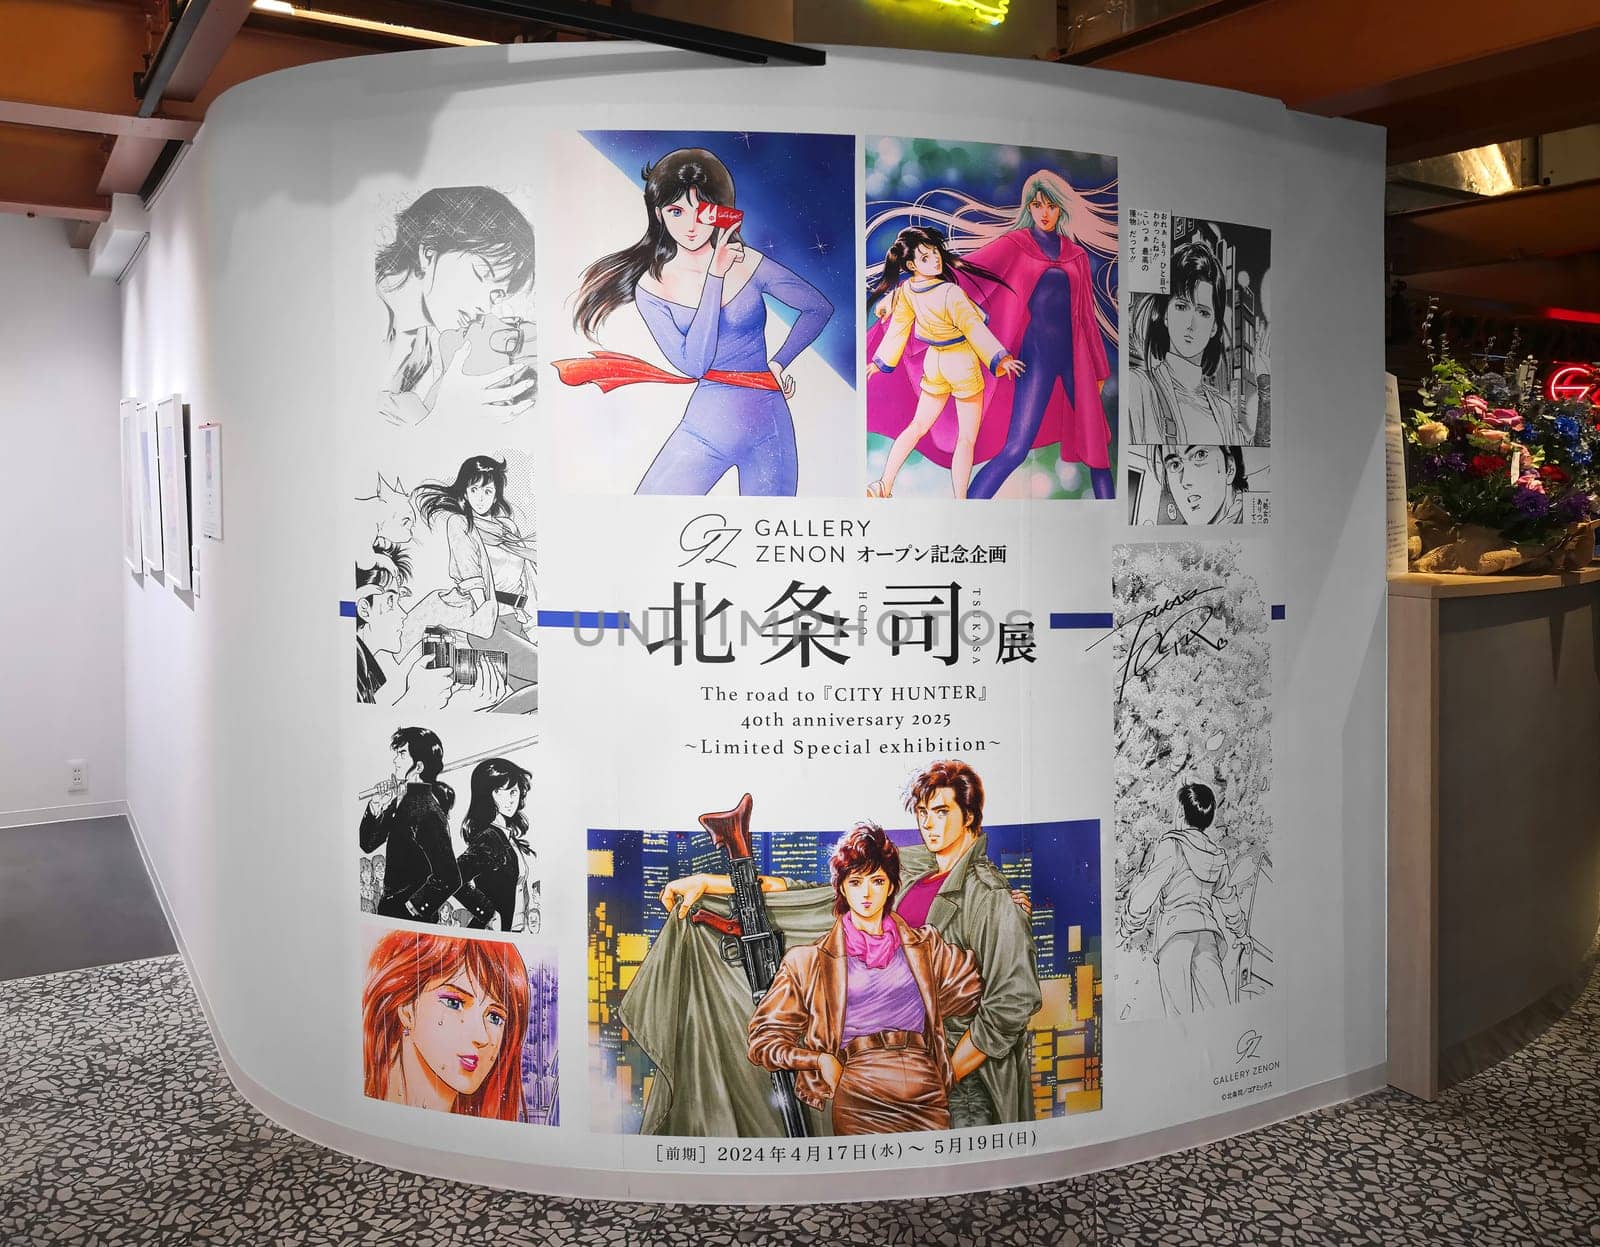 tokyo, japan - apr 25 2024: Entrance of the Tsukasa Hojo 40th Anniversary 2025 Limited Special Exhibition at Gallery Zenon featuring famous manga like City Hunter, Nicky Larson, Cat's Eye, Angel Heart